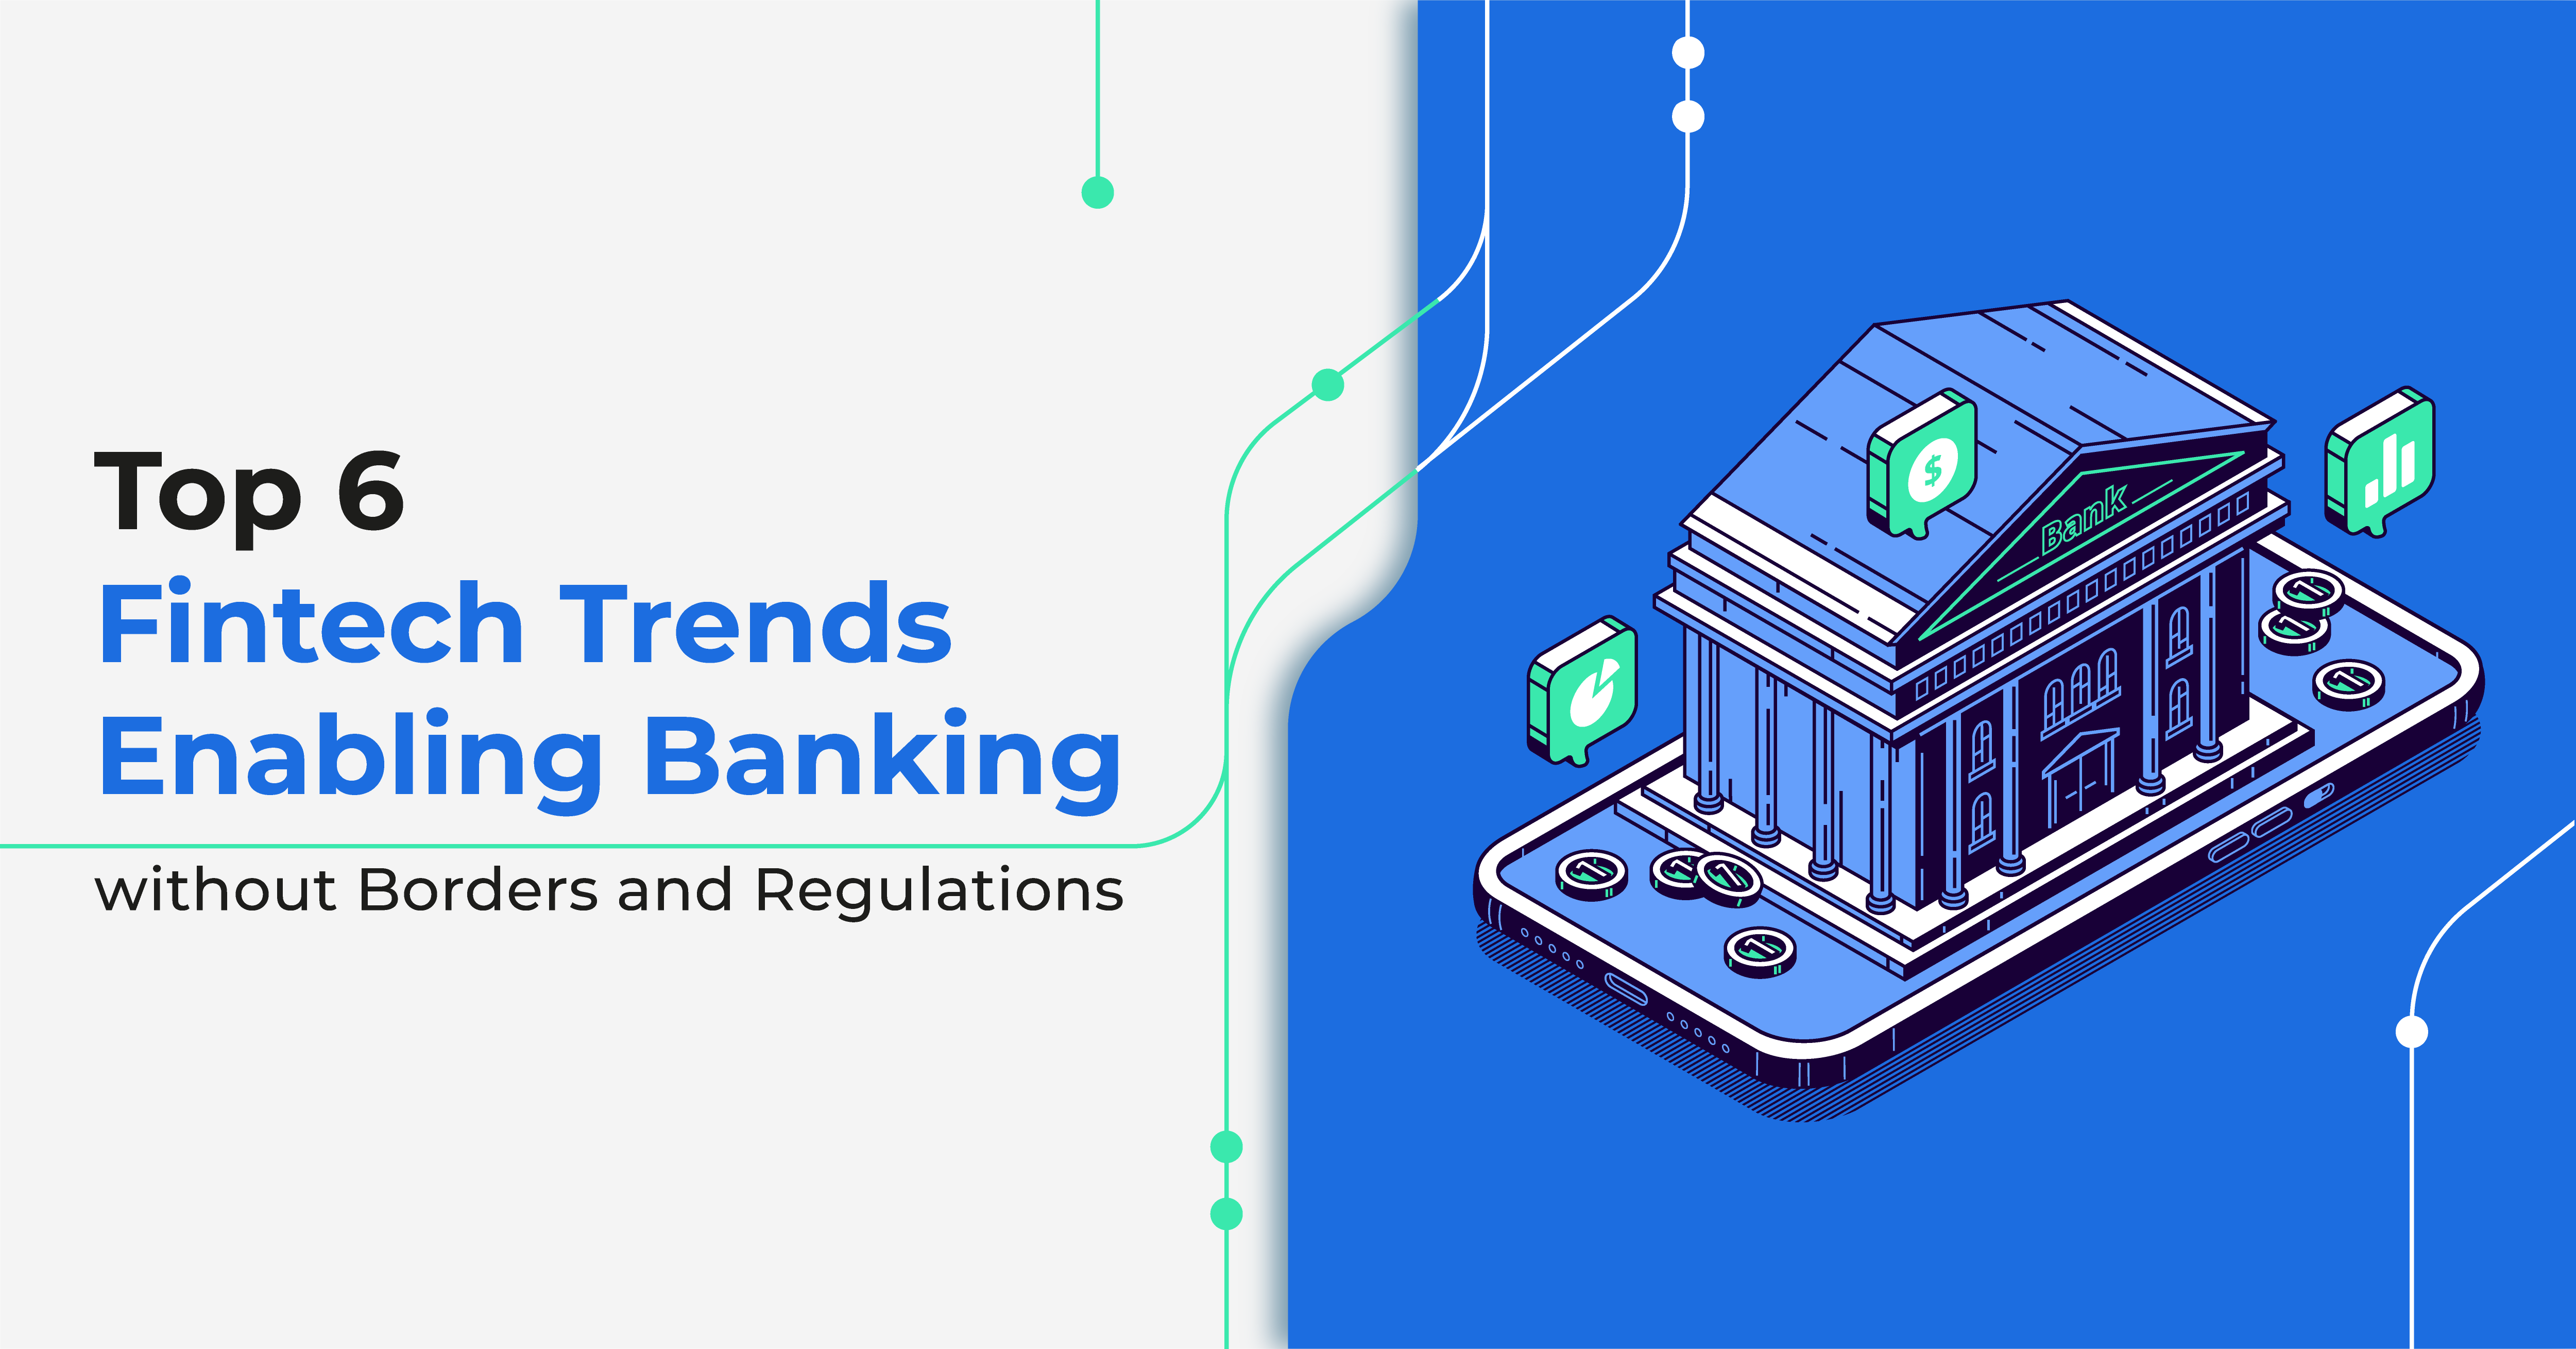 Top 6 Fintech Trends Enabling Banking without Borders and Regulations